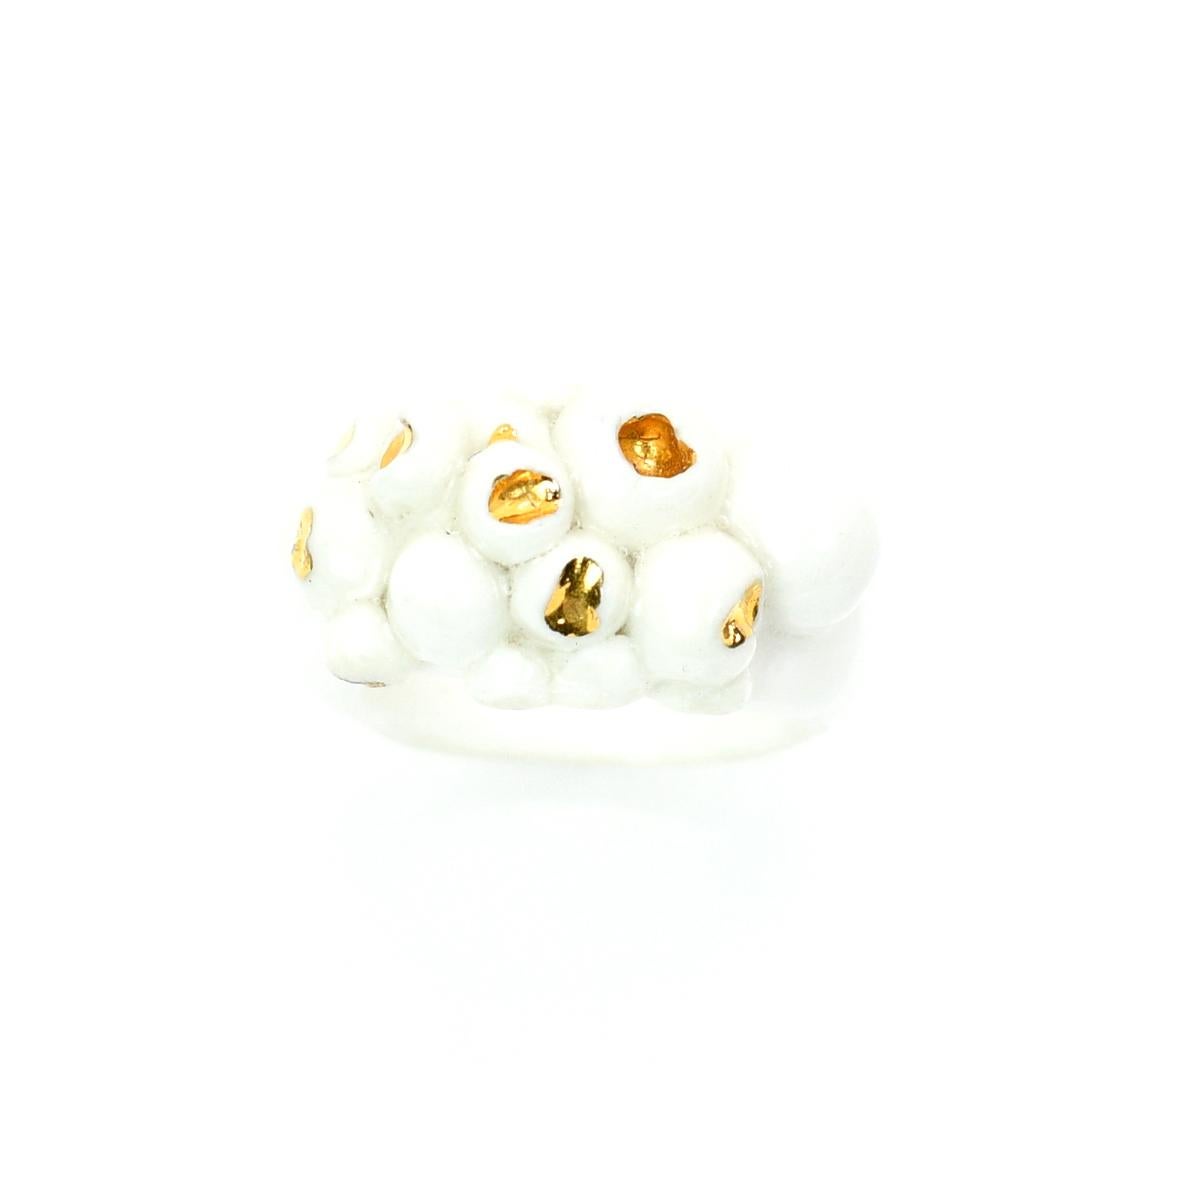 Porcelain  24K gold embellishment  Handmade in London

Indulge in luxury with our FRANCONIA Porcelain Ring. Made from the finest whitest porcelain and adorned with 24k gold, this ring is a wearable work of art that evokes the fluidity of water